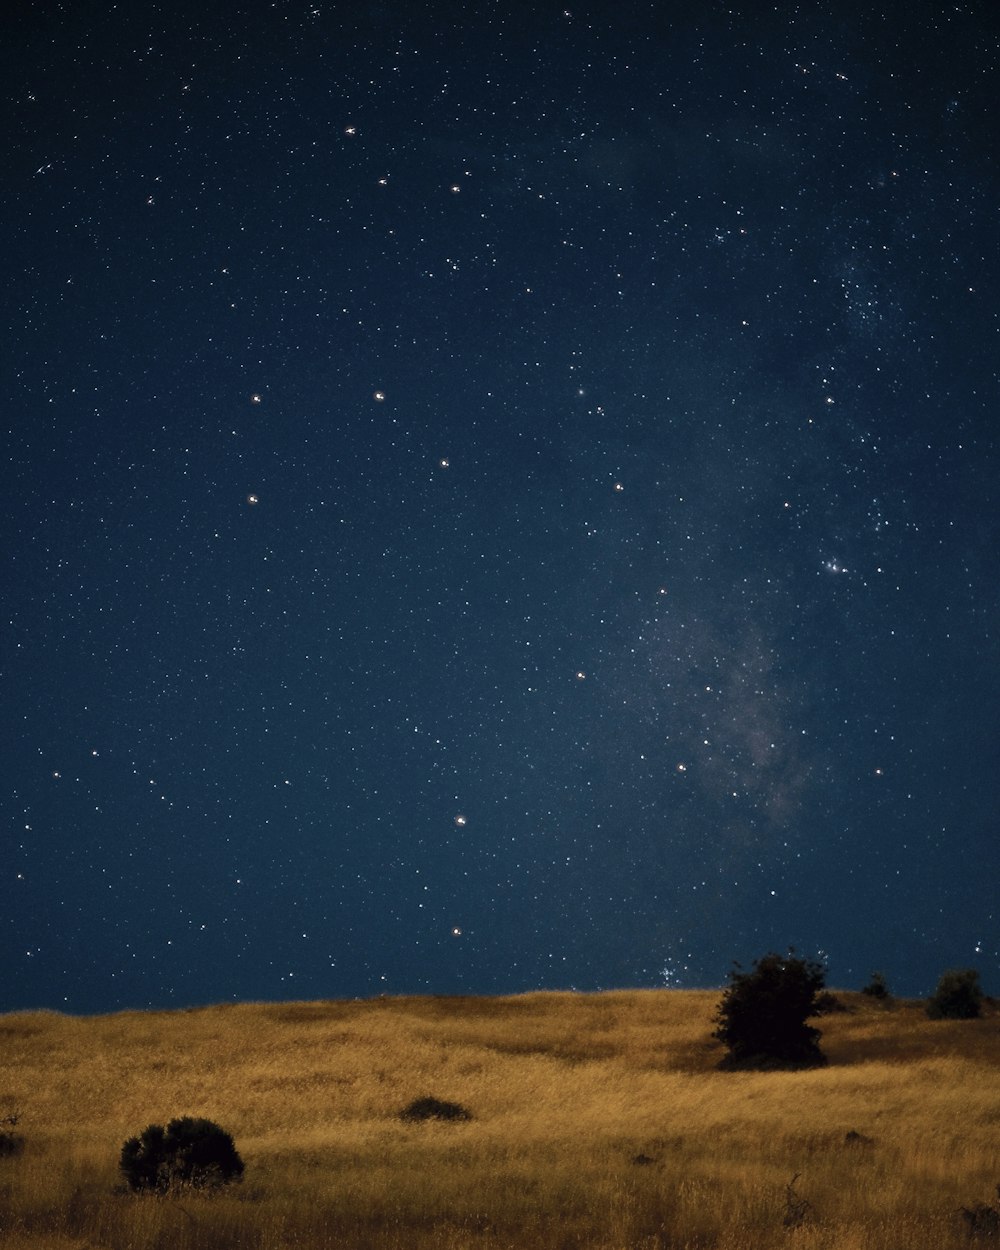 the night sky is full of stars above a grassy field